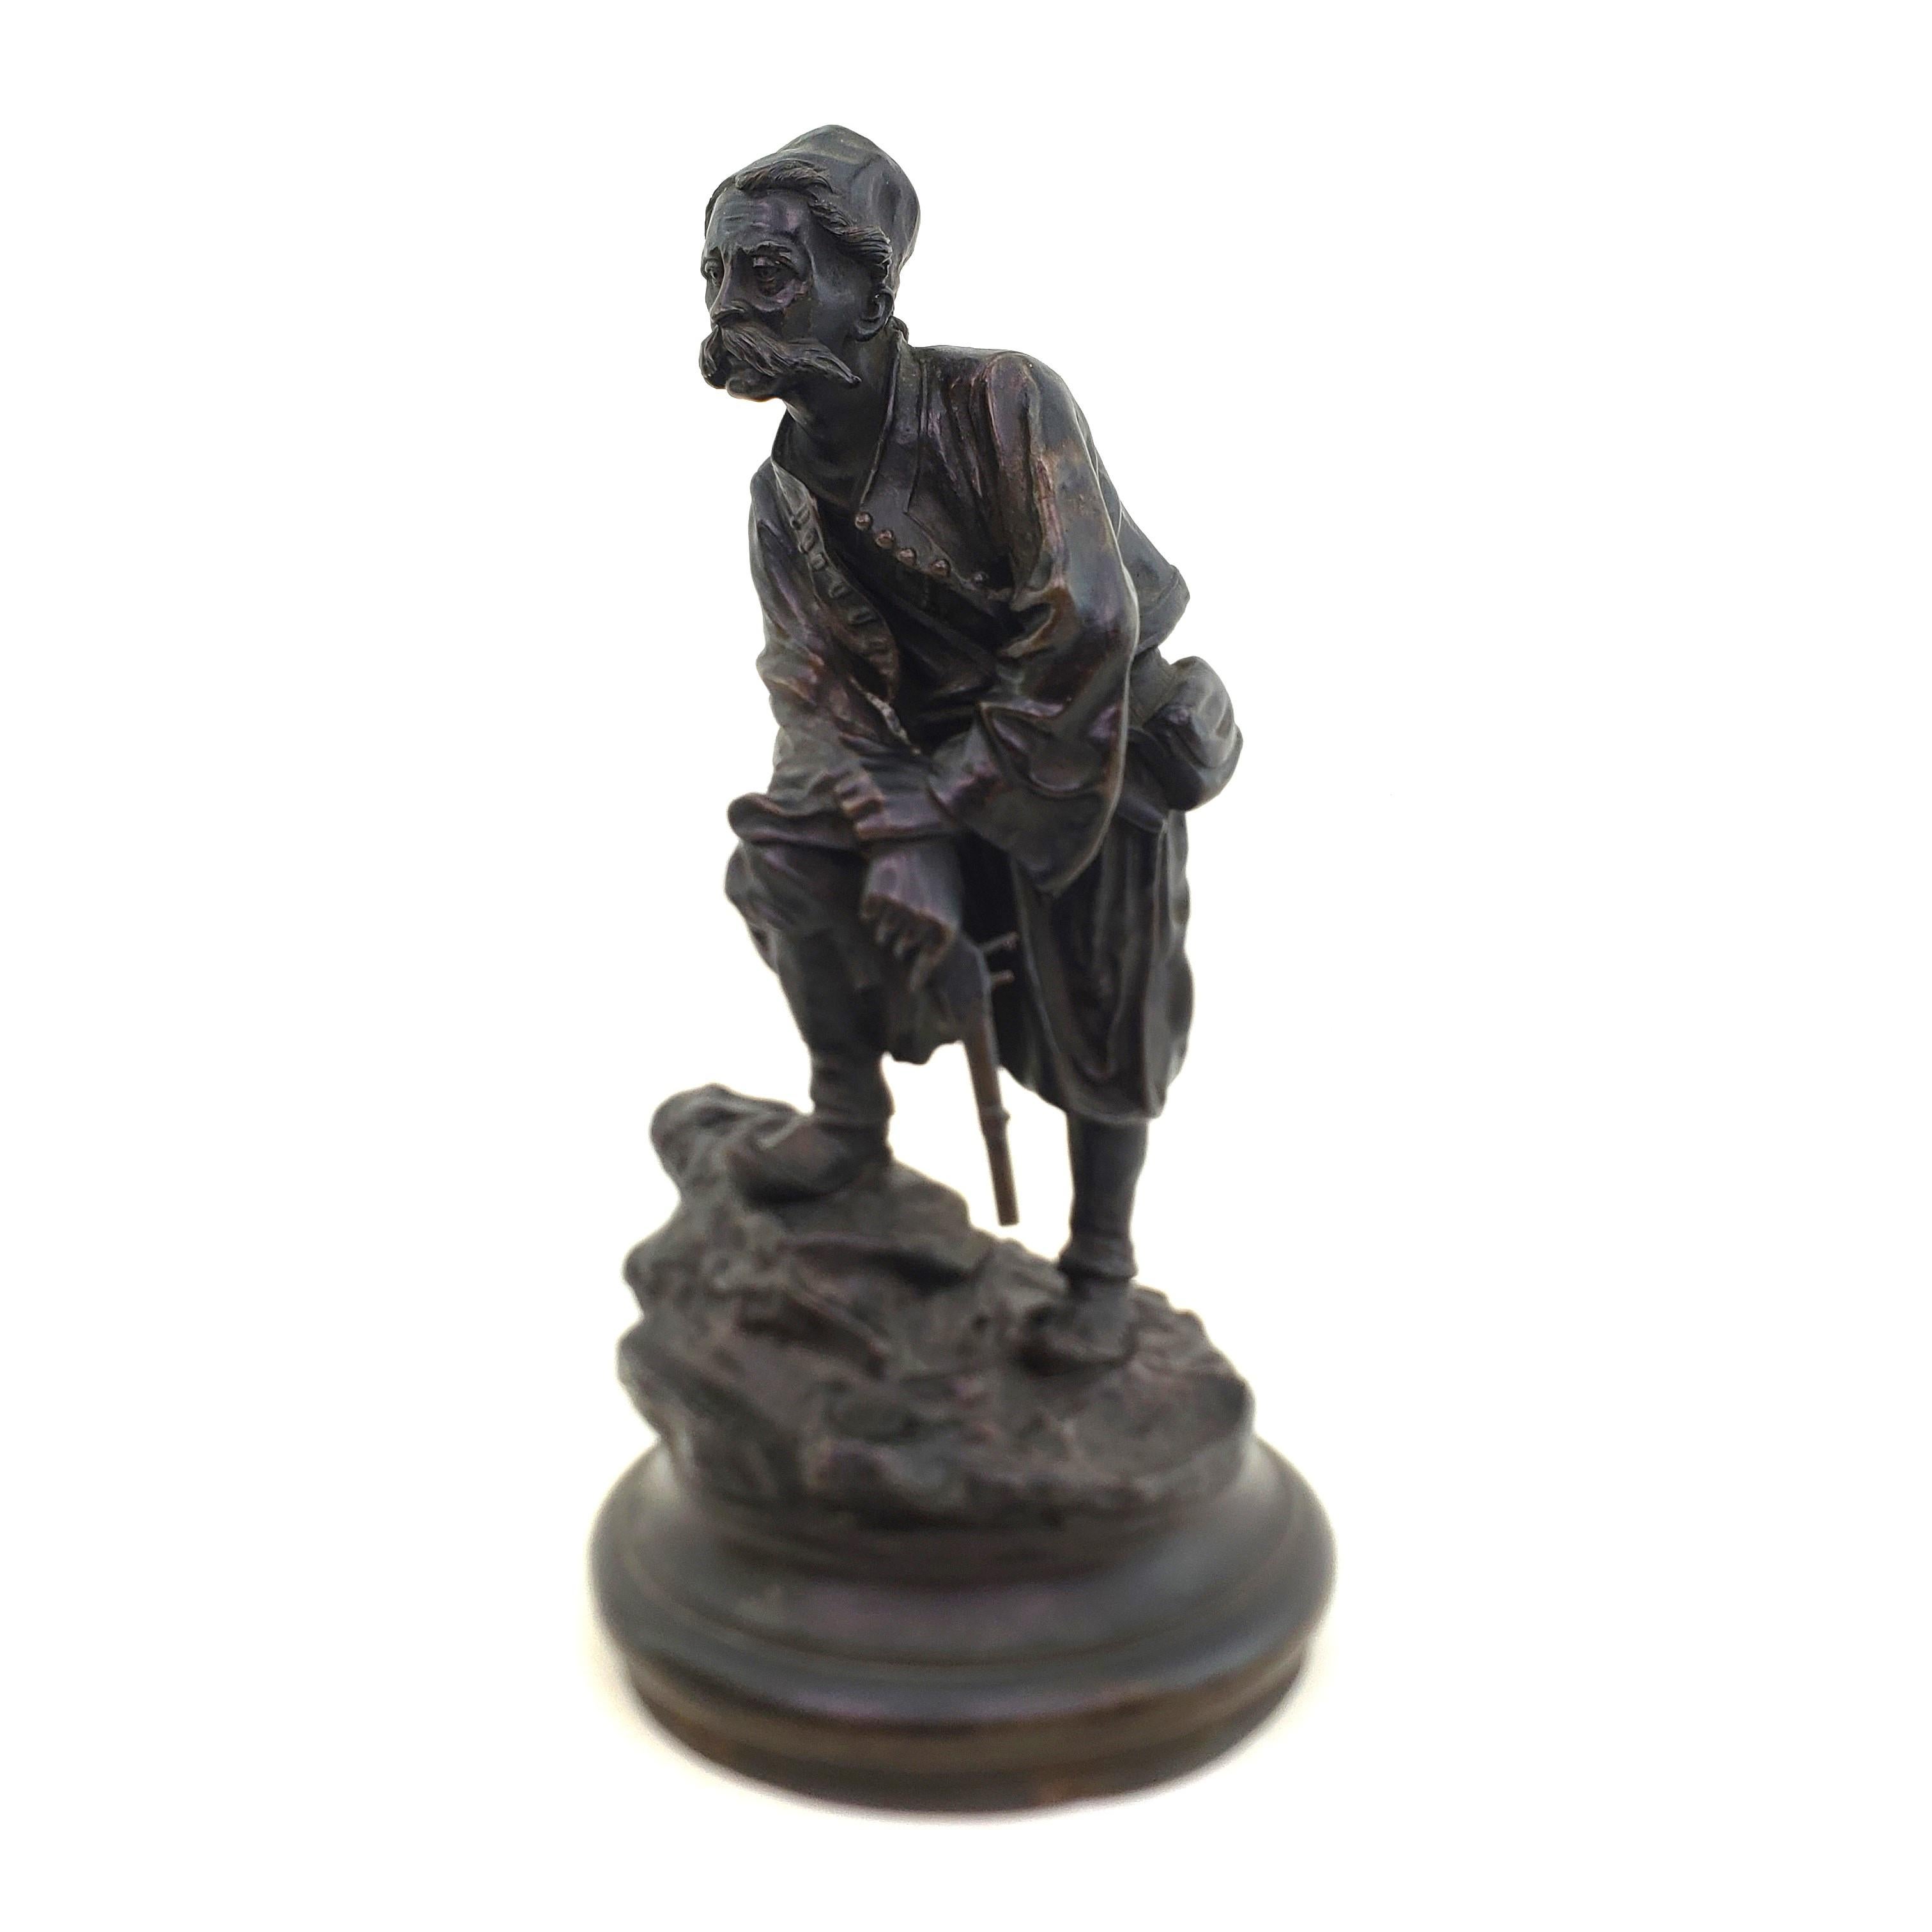 This antique sculpture was done by the well known Vasily Grachev of Russia and dates to approximately 1880 and done in his signature style. The sculpture is done in a very ornately cast and patinated bronze with a turned wooden base. The sculpture